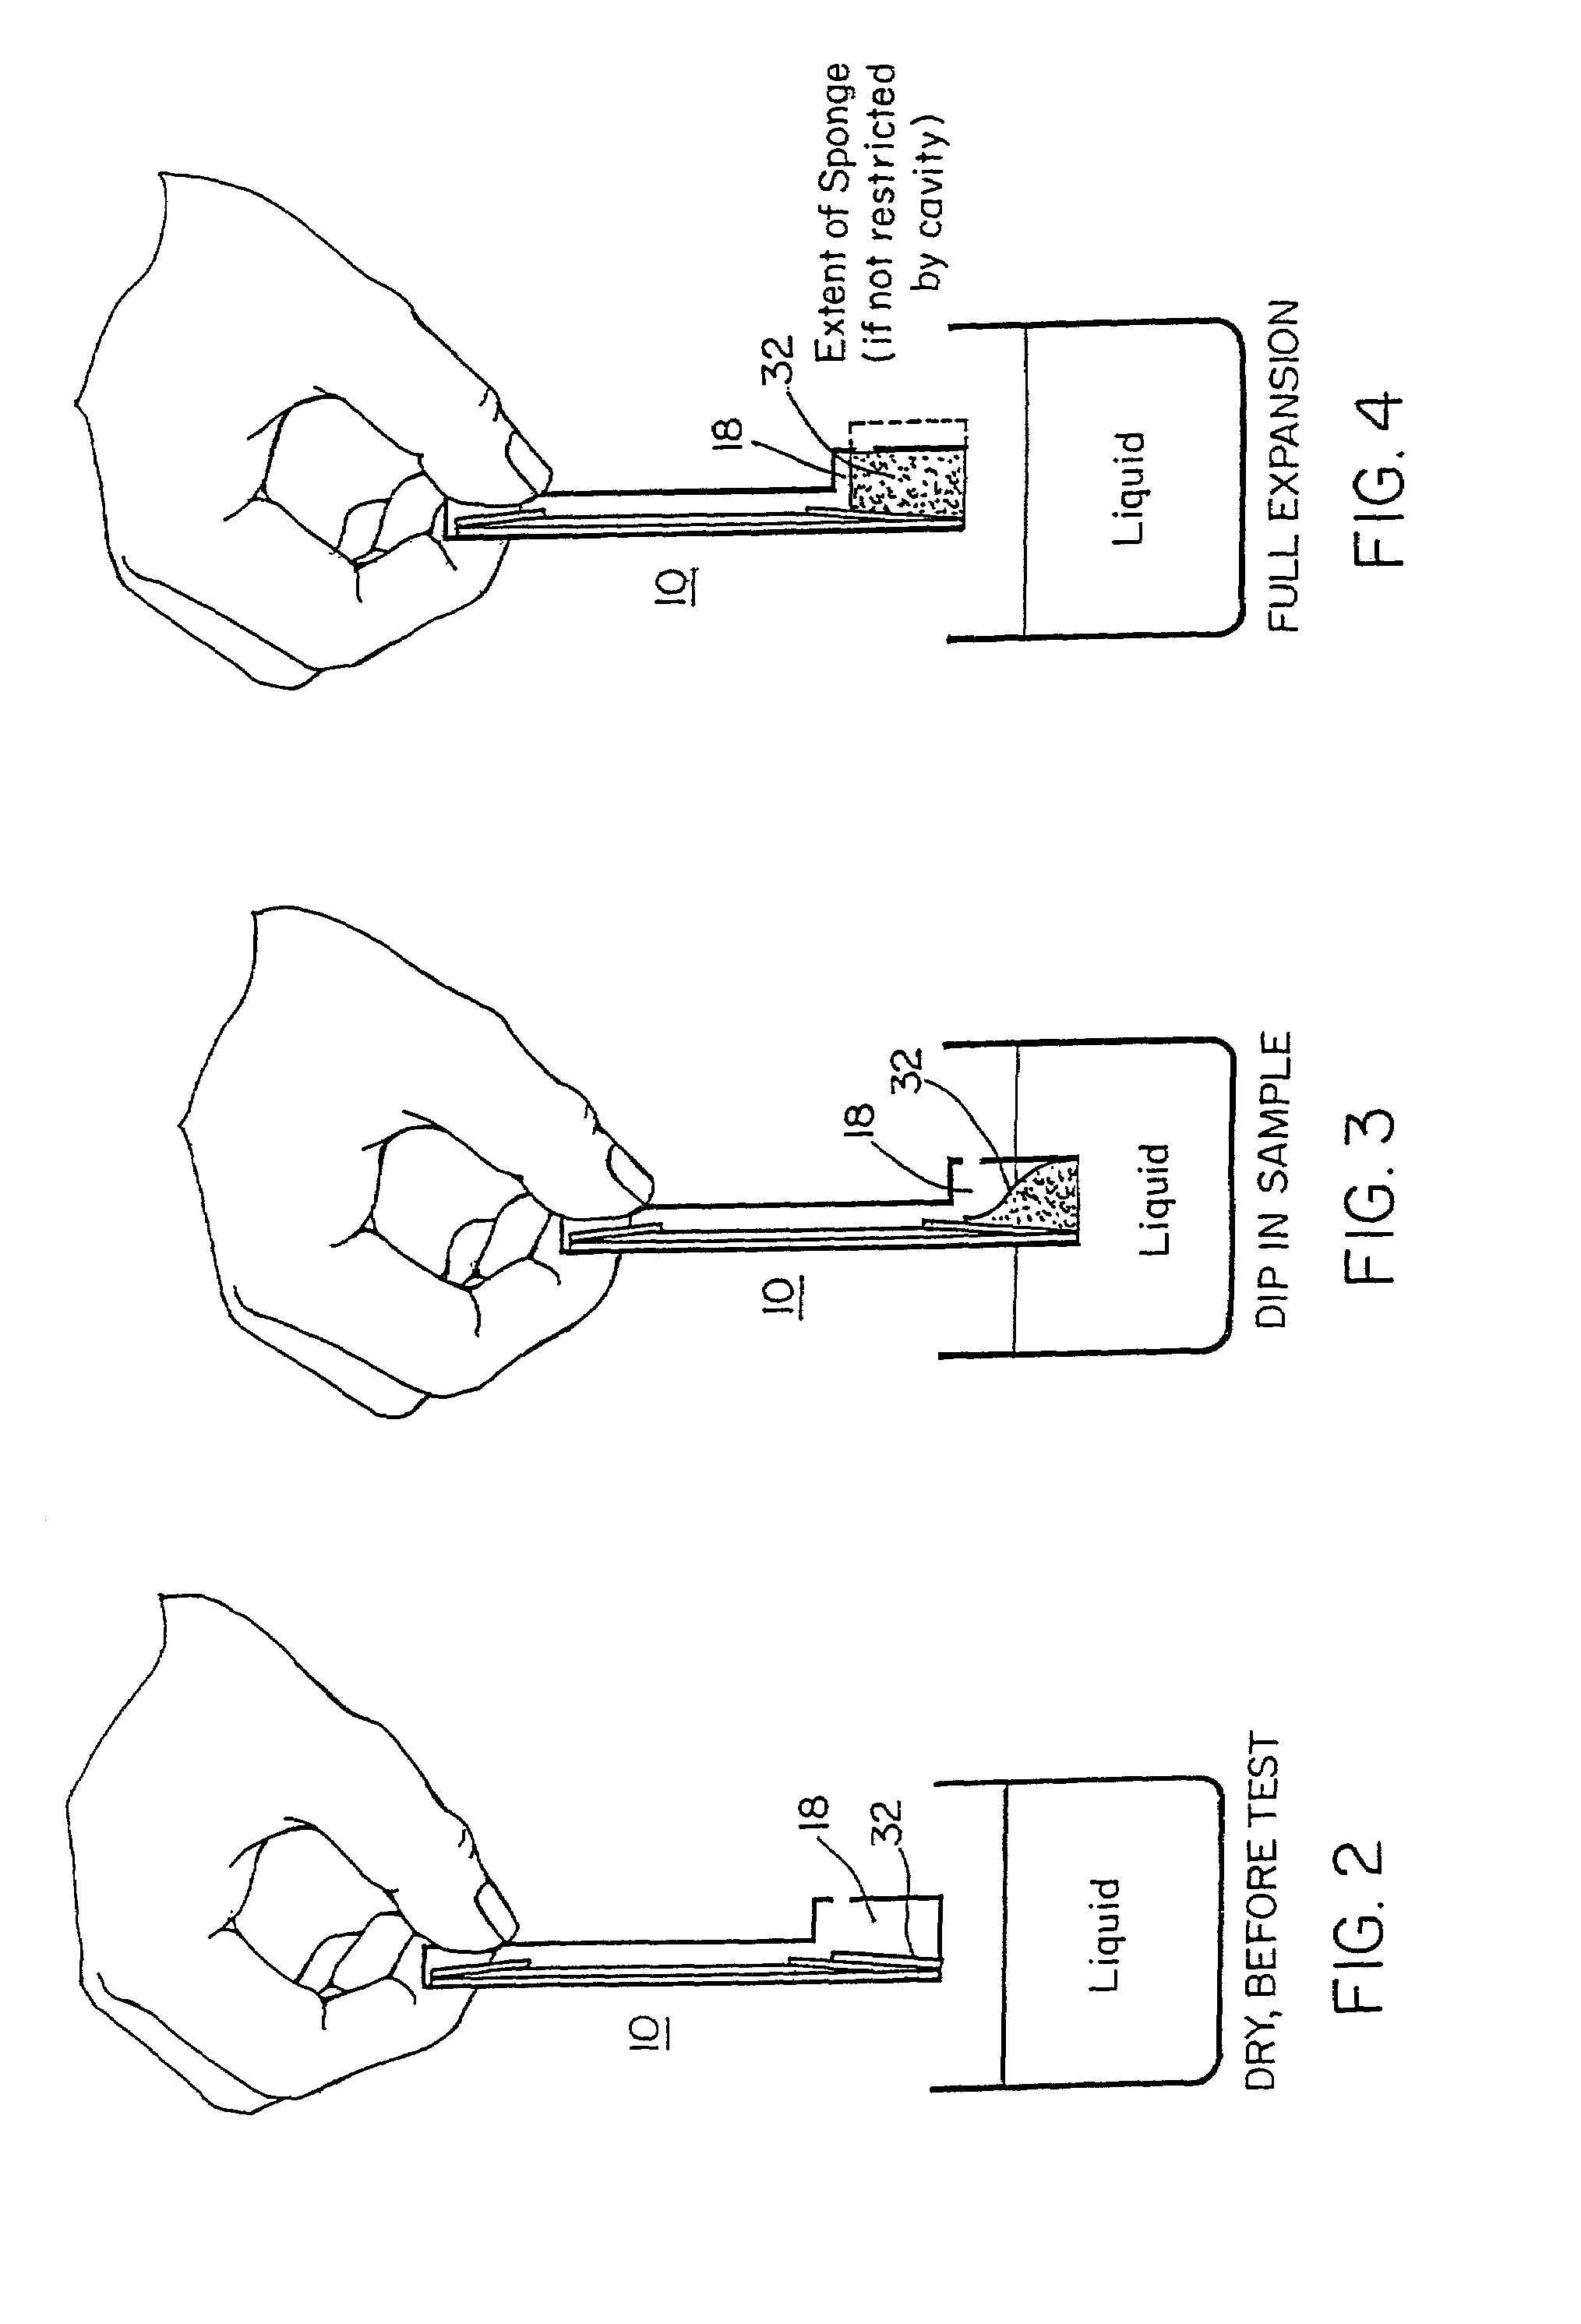 Method for detecting the presence of an analyte in a sample